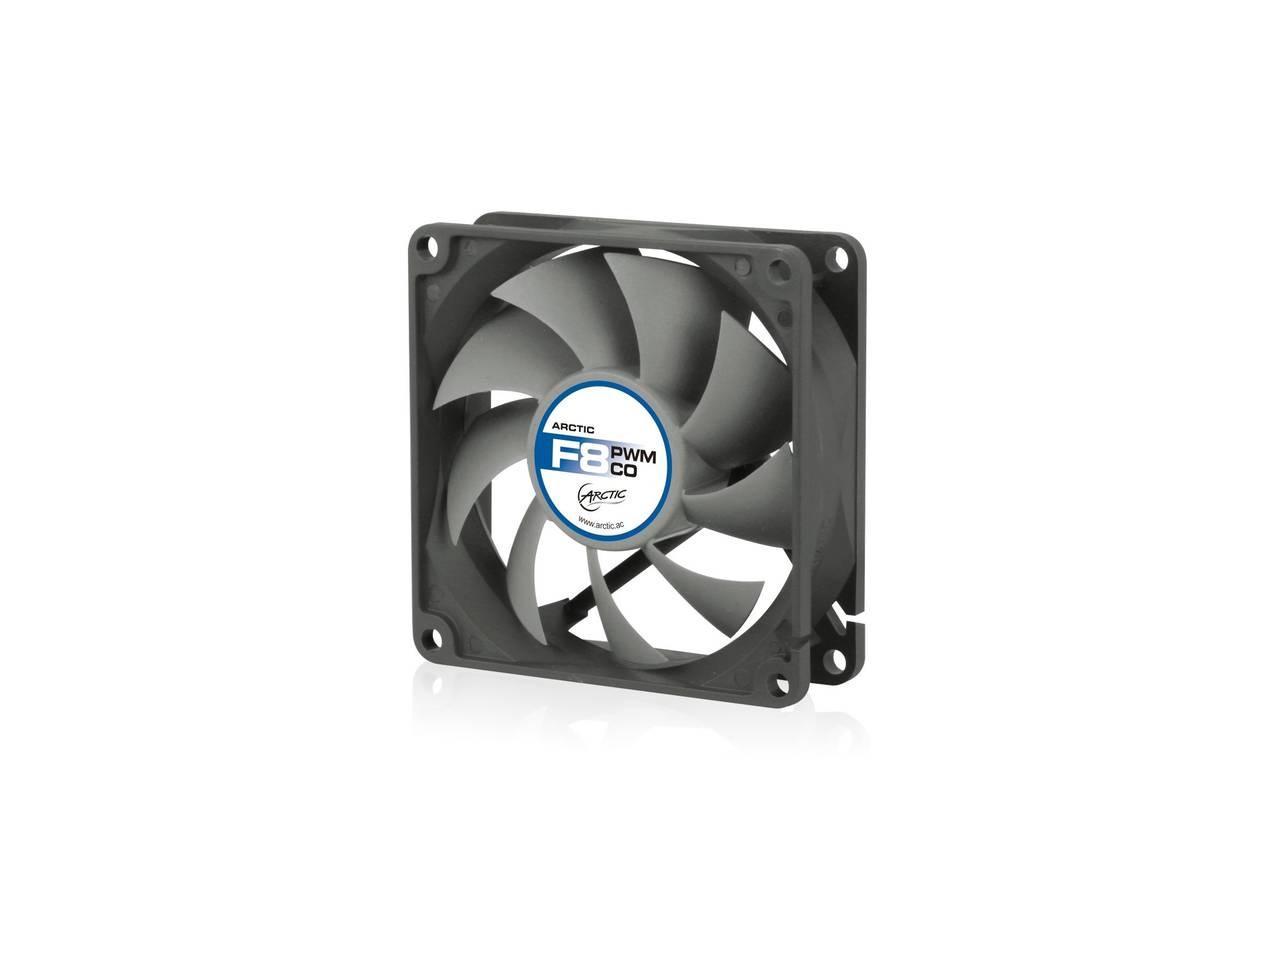 Arctic AFACO-080PC-GBA01 F8 PWM CO 80mm Case Fan with Standard Case